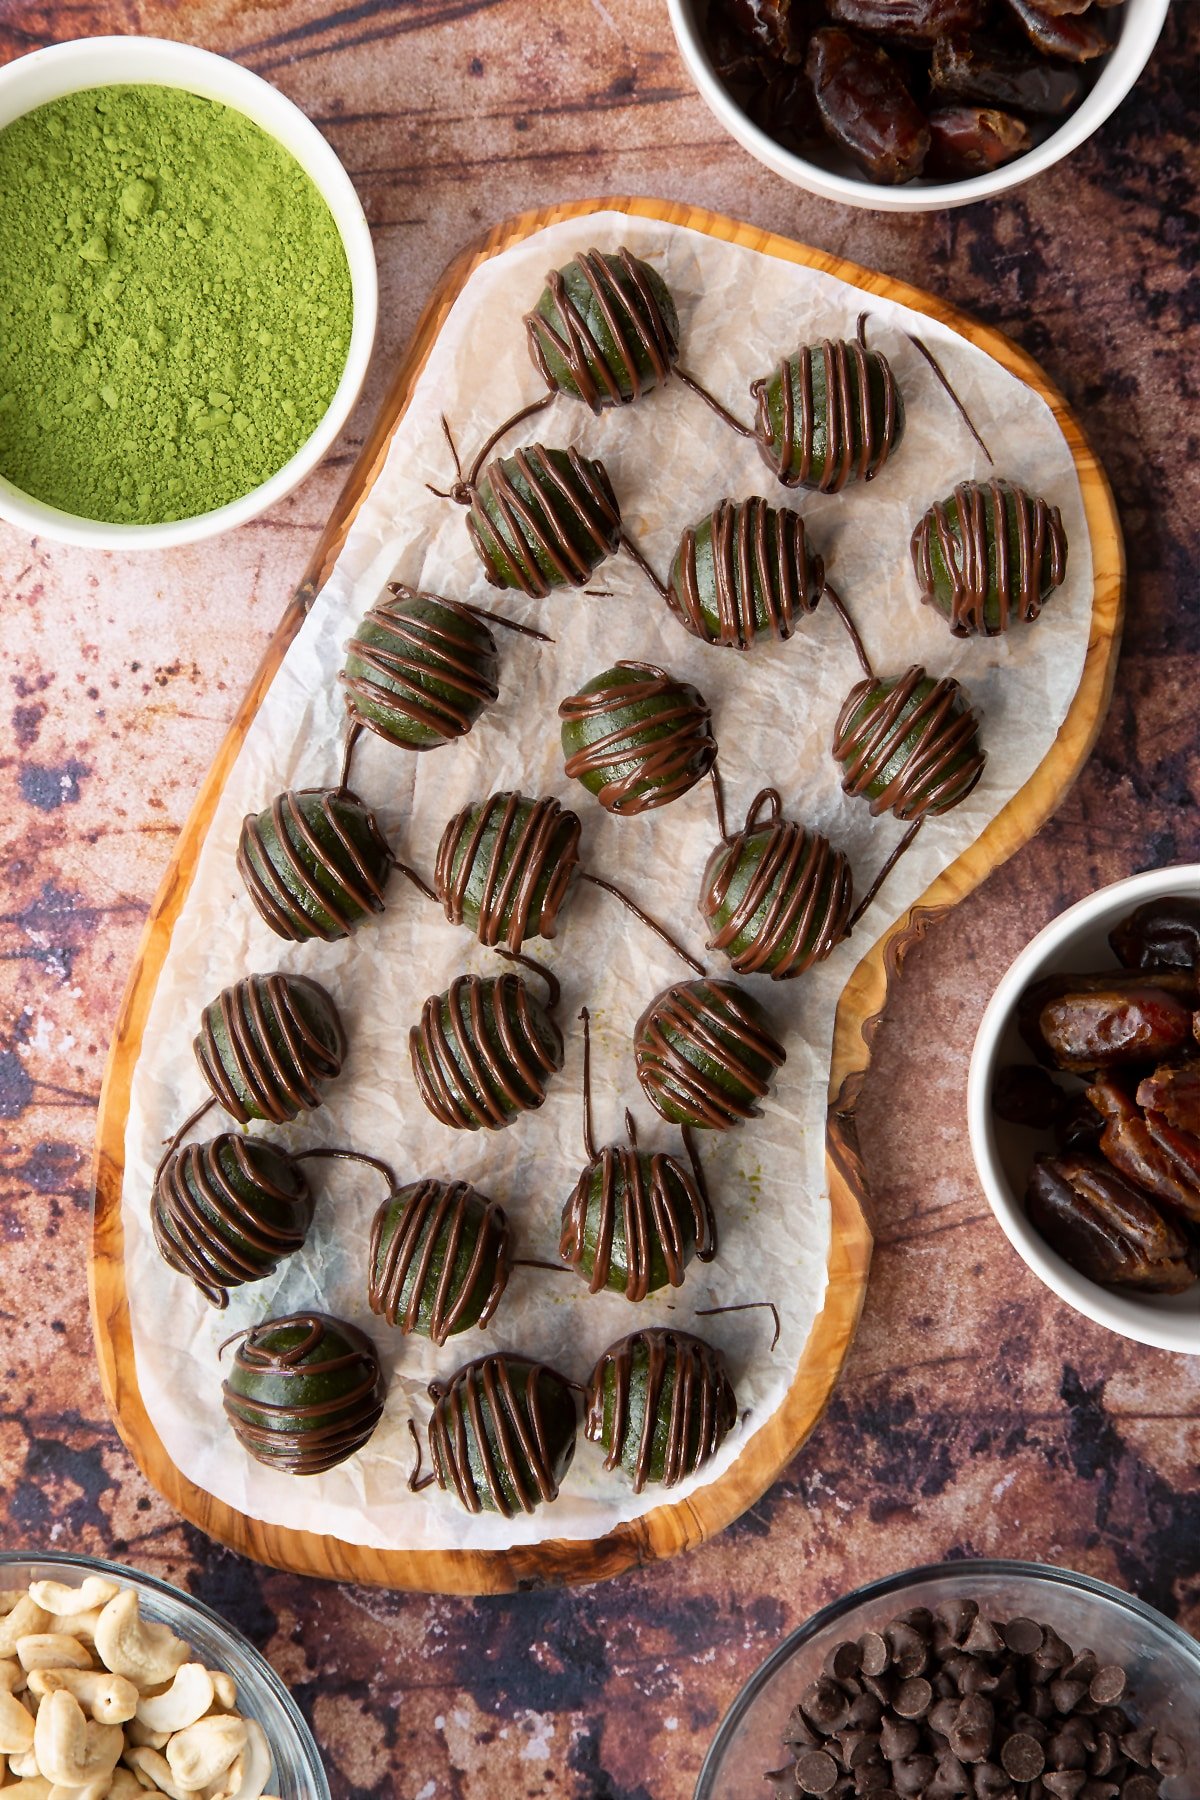 Matcha protein balls shown from above on a wooden board lined with baking paper. The balls are dark green and have been drizzled with dark chocolate.